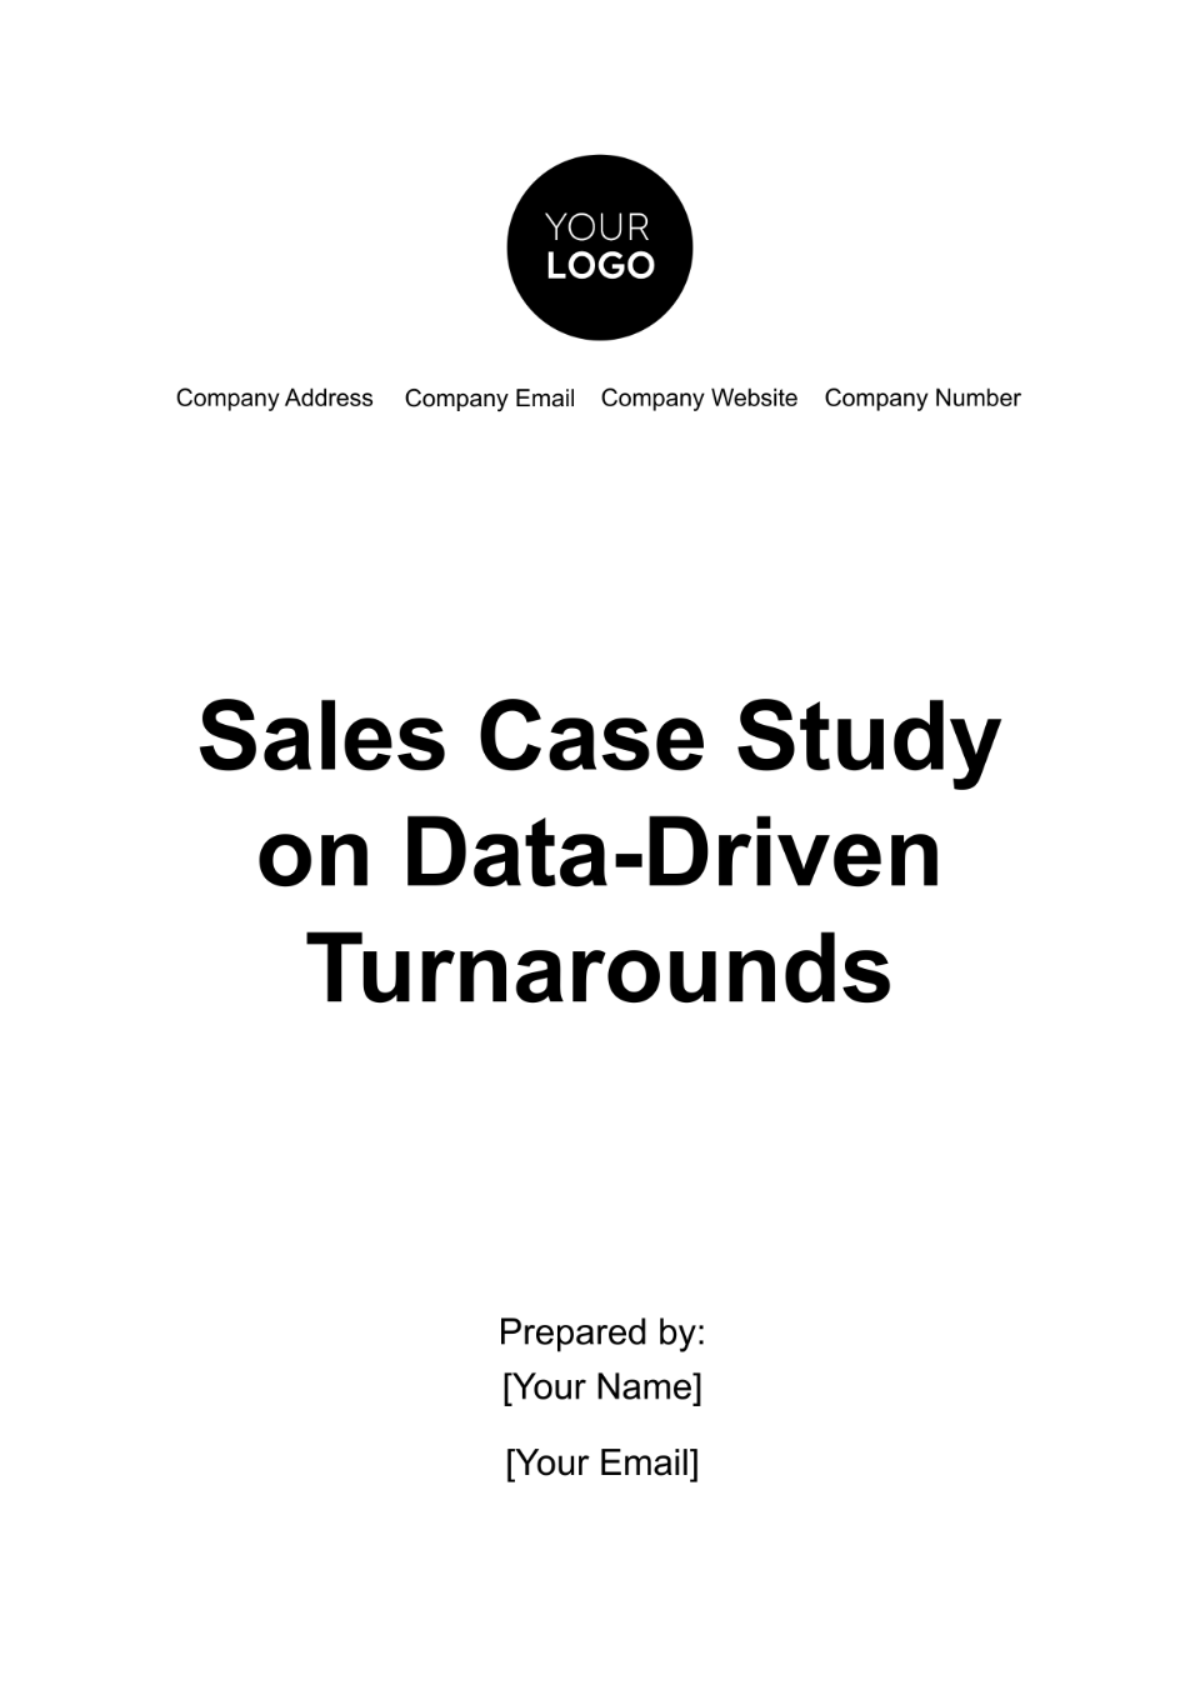 Sales Case Study on Data-Driven Turnarounds Template